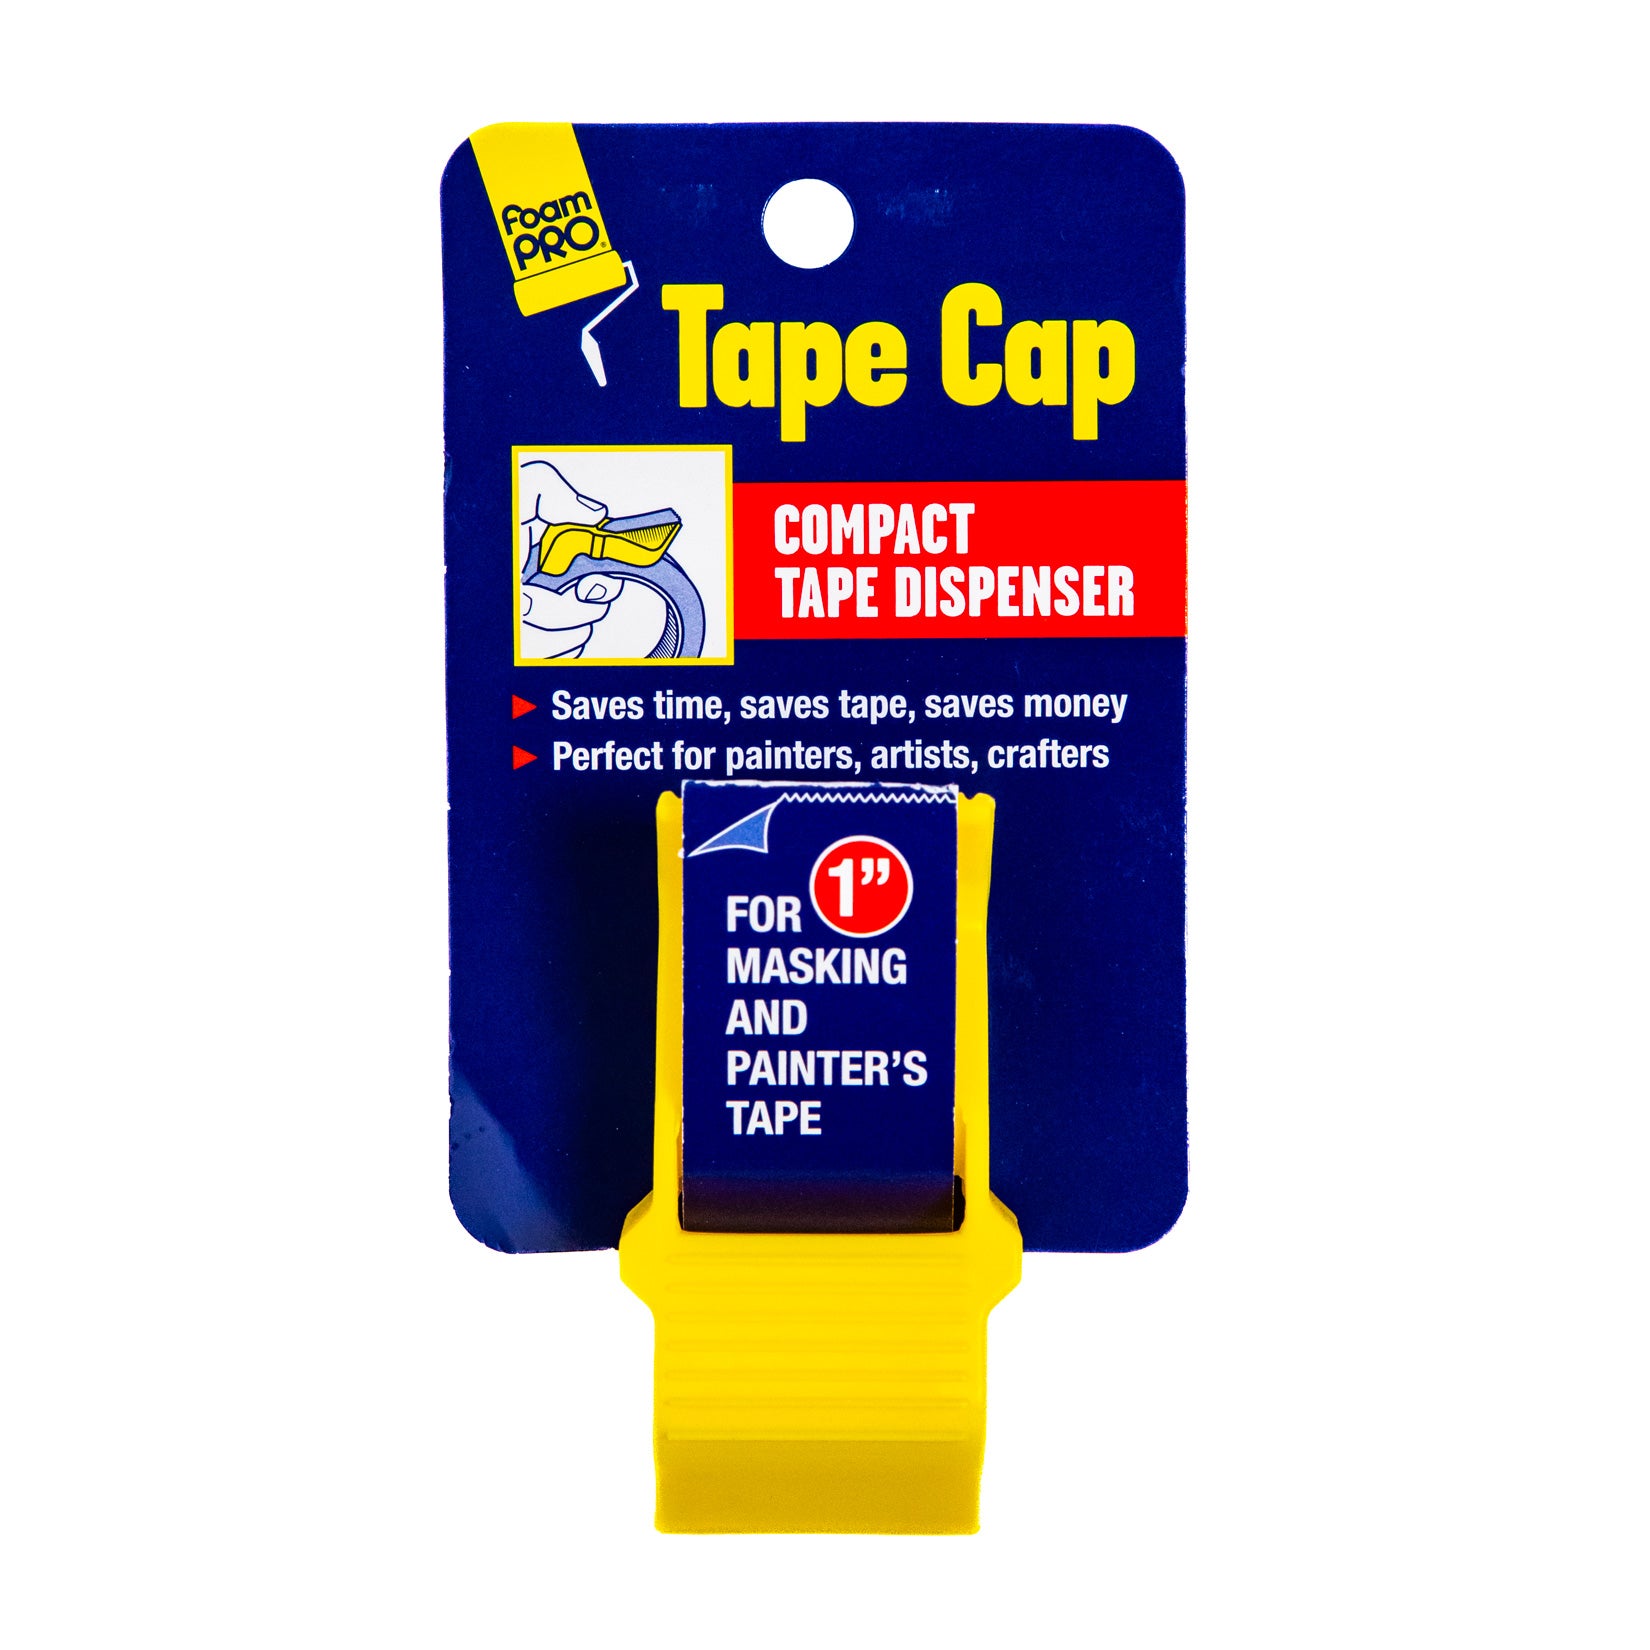 Crafter's Tape Refill